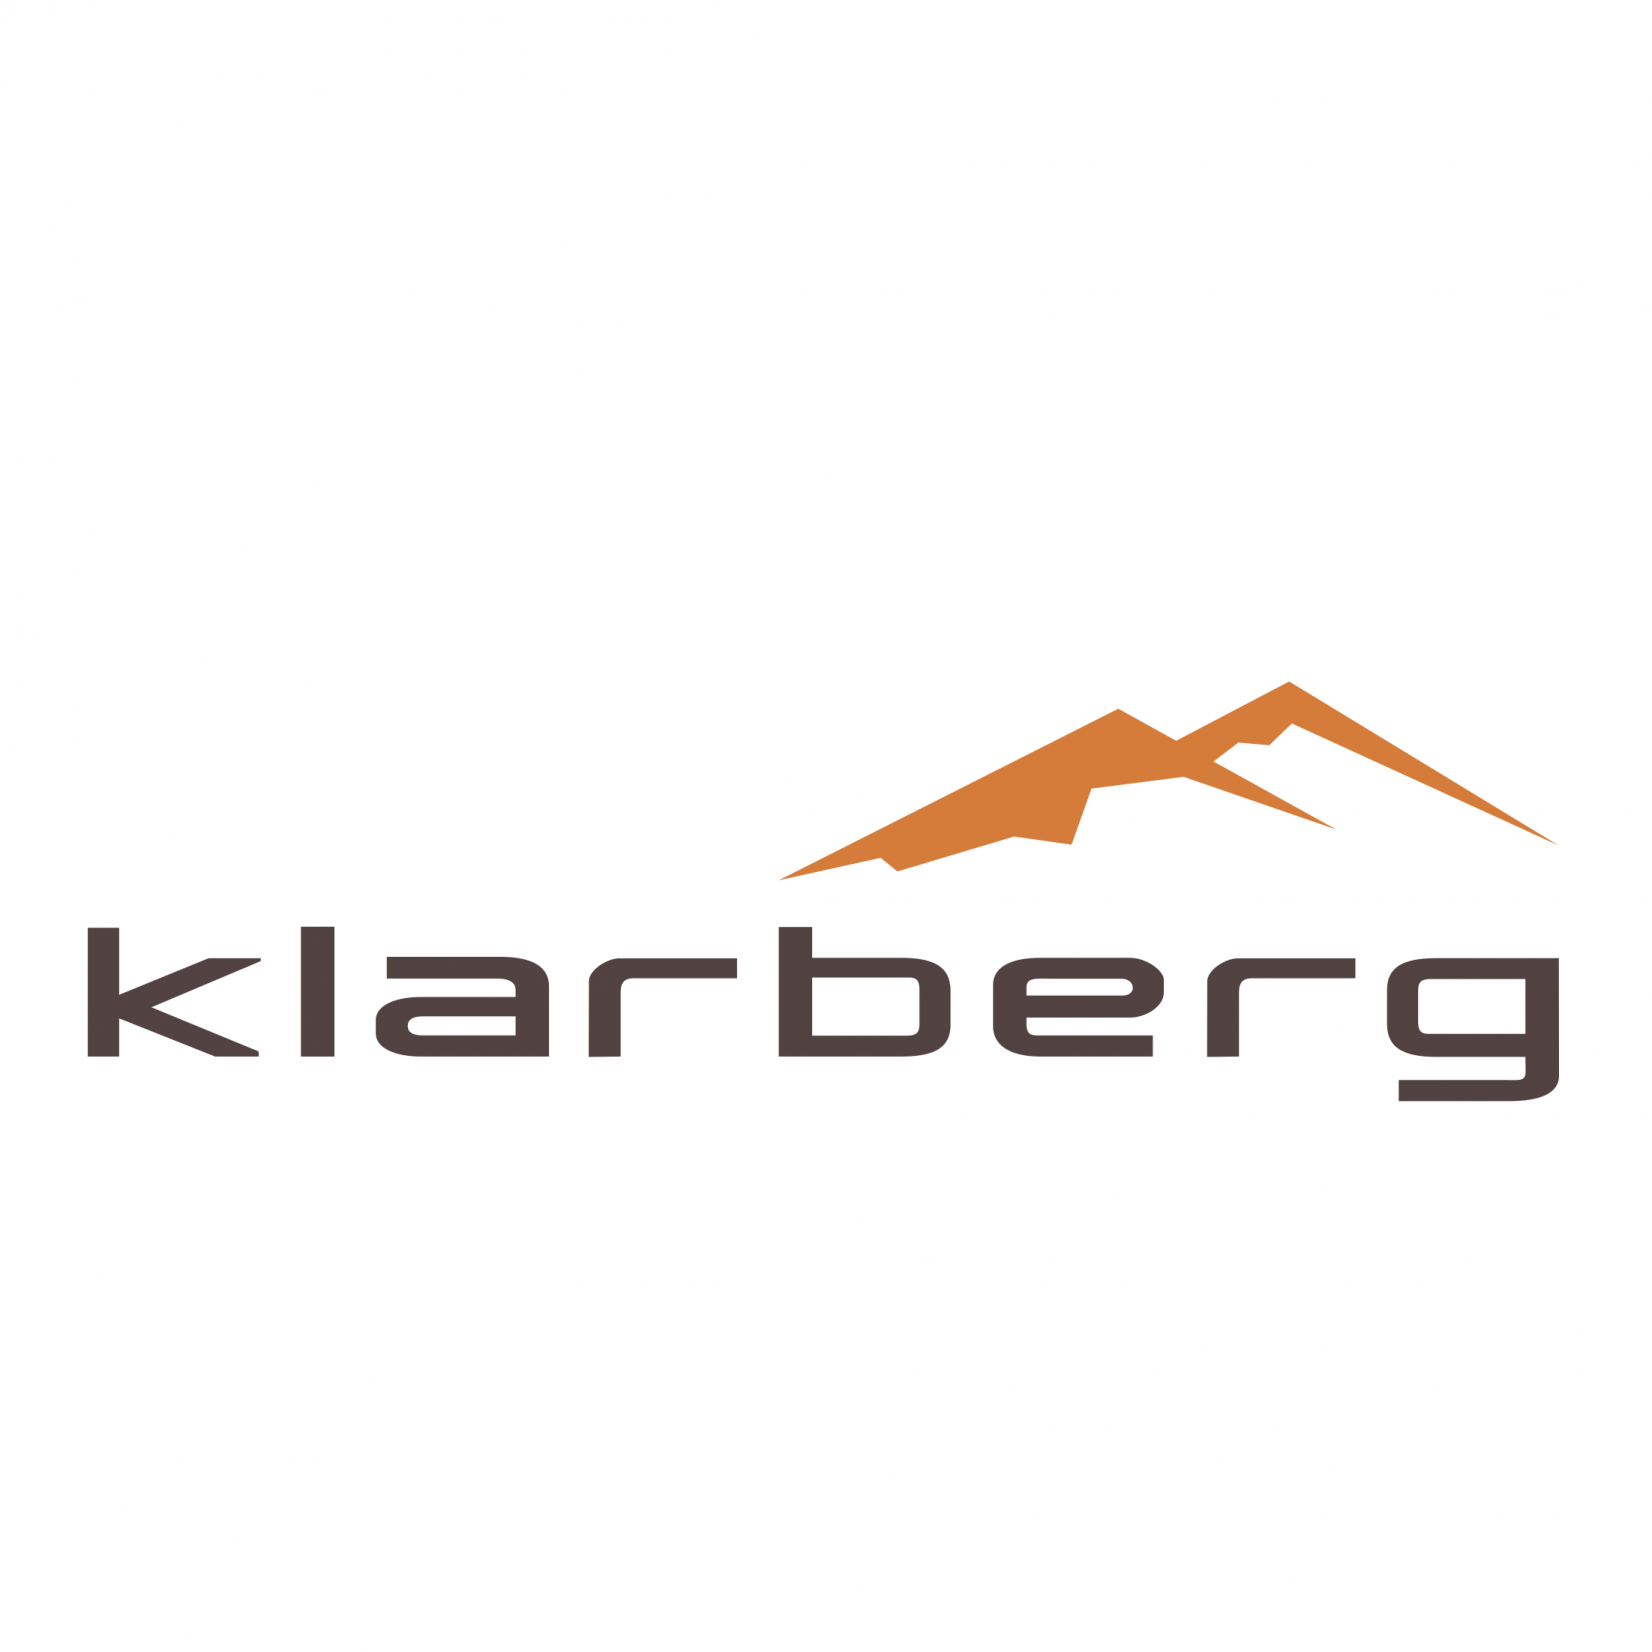 KLARBERG OÜ - Wholesale of electronic and telecommunications equipment and parts in Tallinn